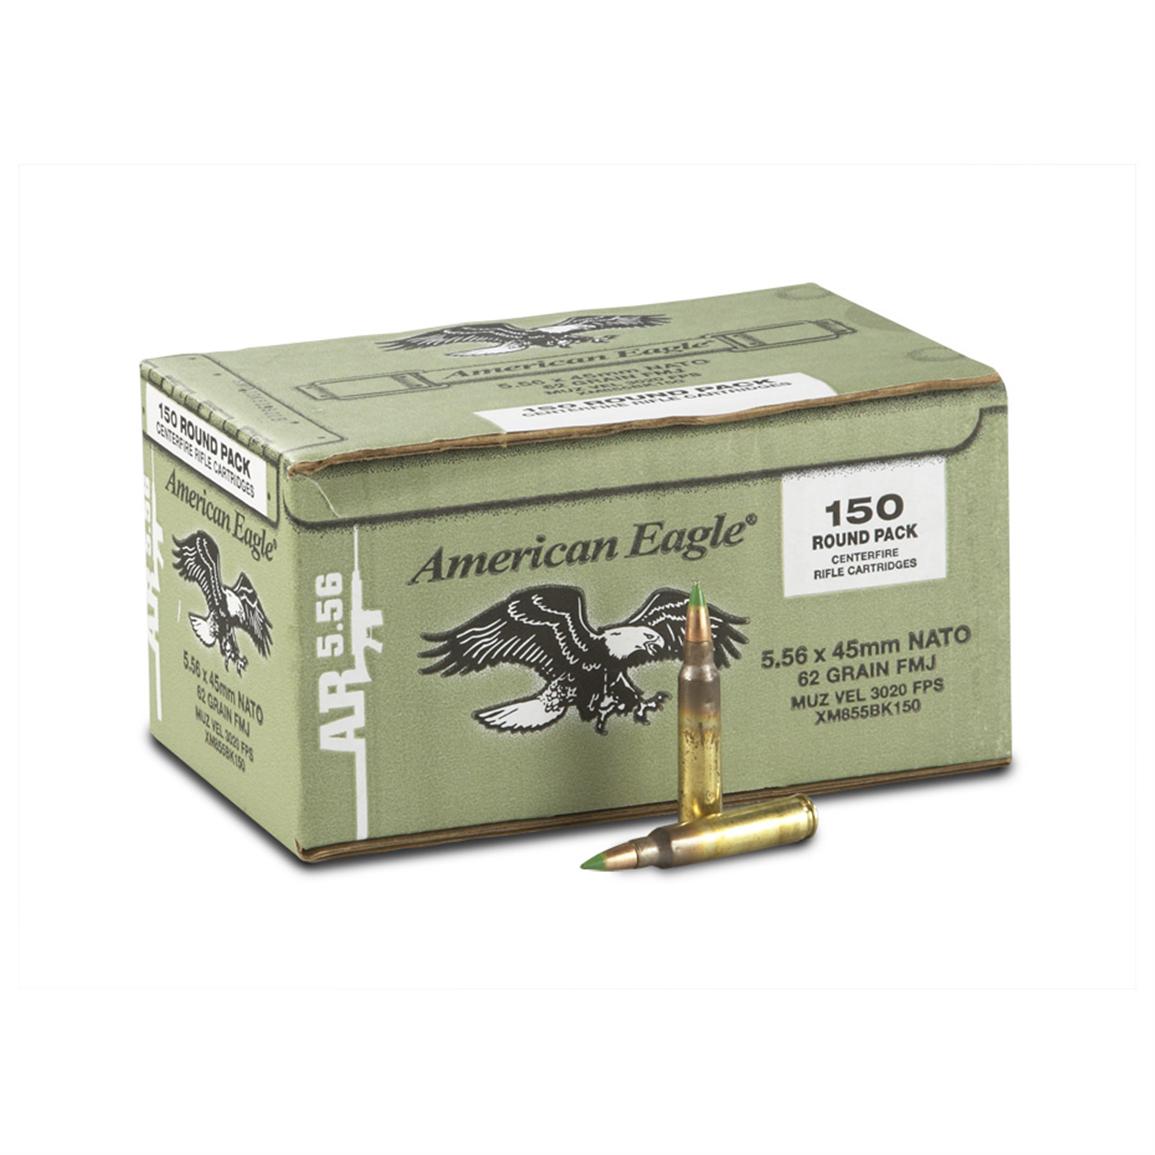 150 rounds Federal American Eagle .223 (5.56x45mm) 62 Grain FMJ M855 ...